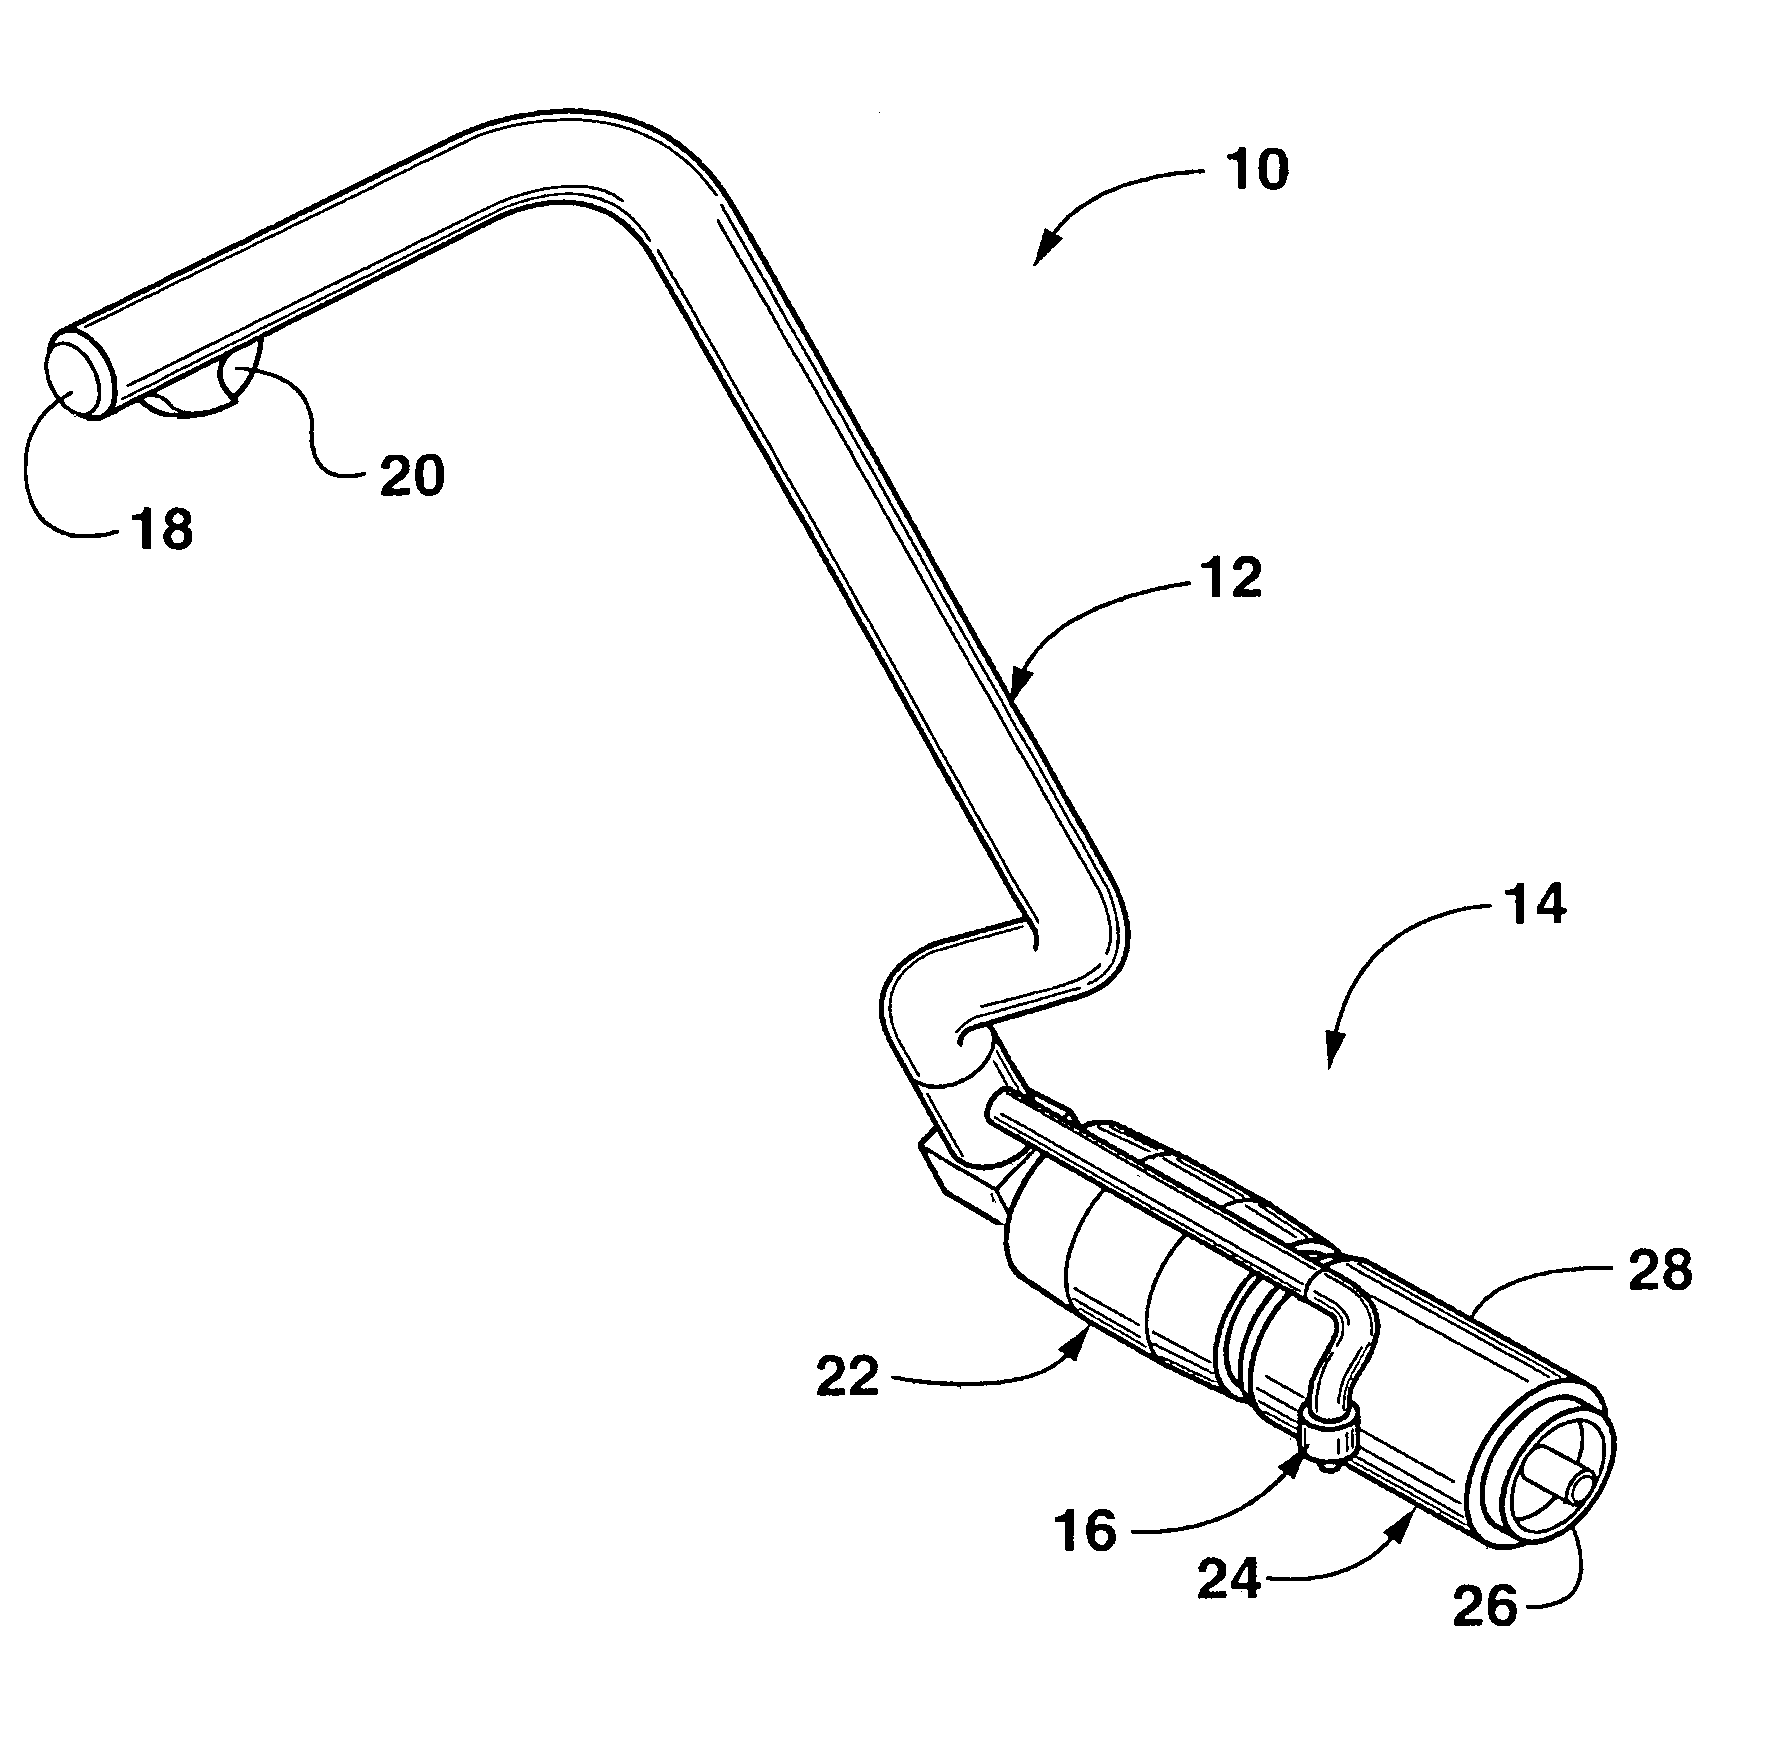 Carpet stain removal device